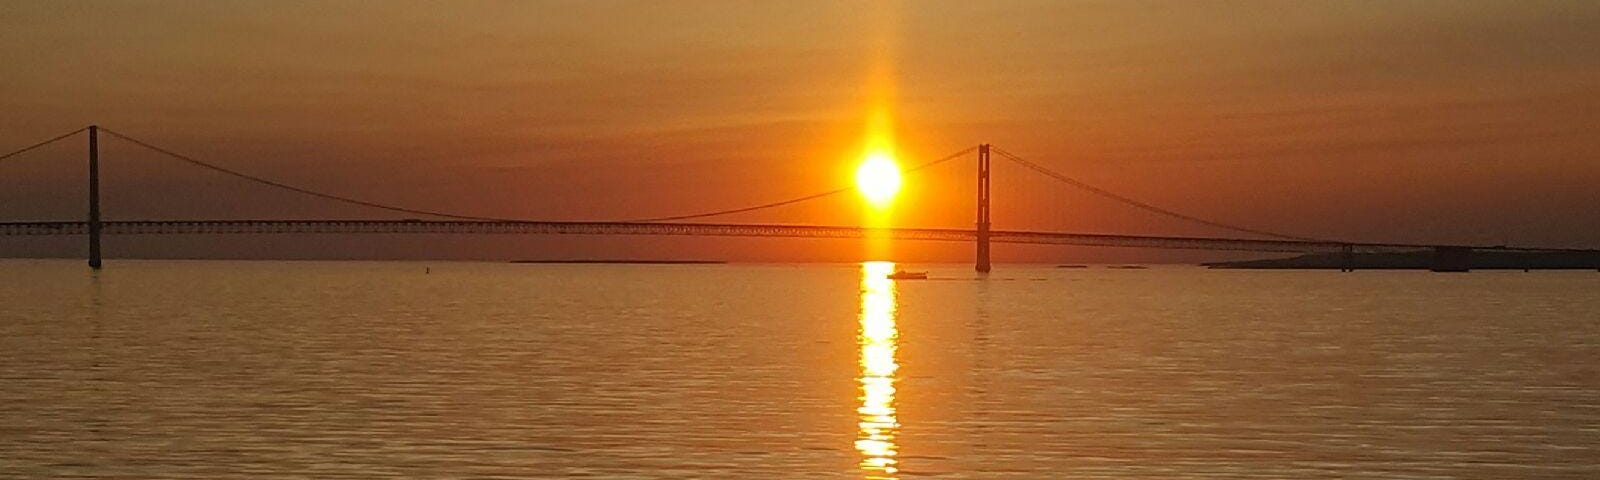 Photo of the Mackinac Bridge with the golden sun setting over the waters of Lake Huron.